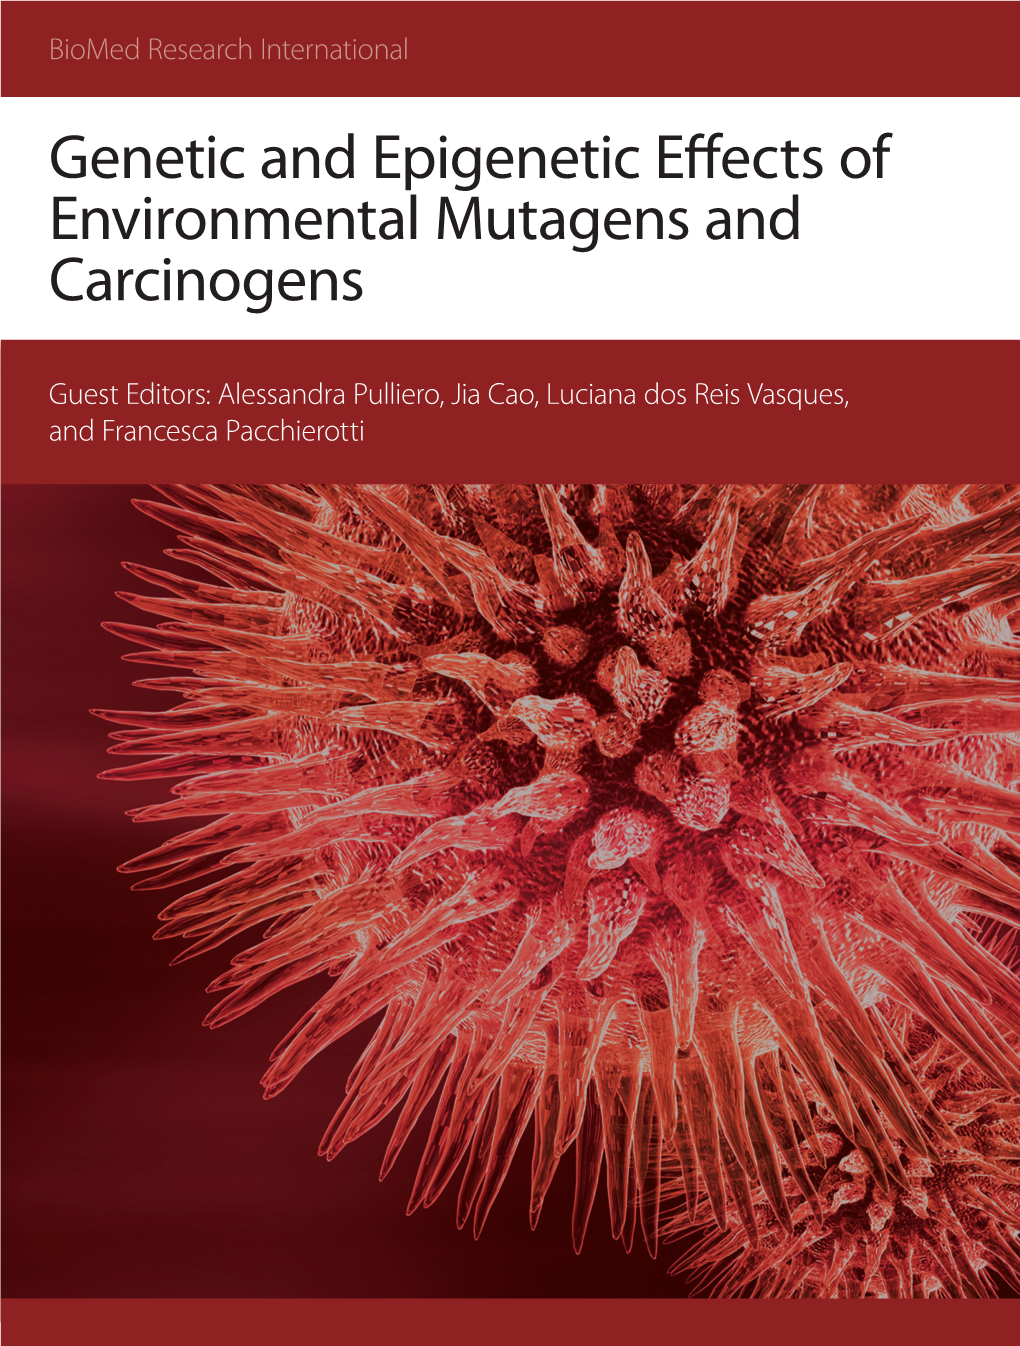 Genetic and Epigenetic Effects of Environmental Mutagens and Carcinogens